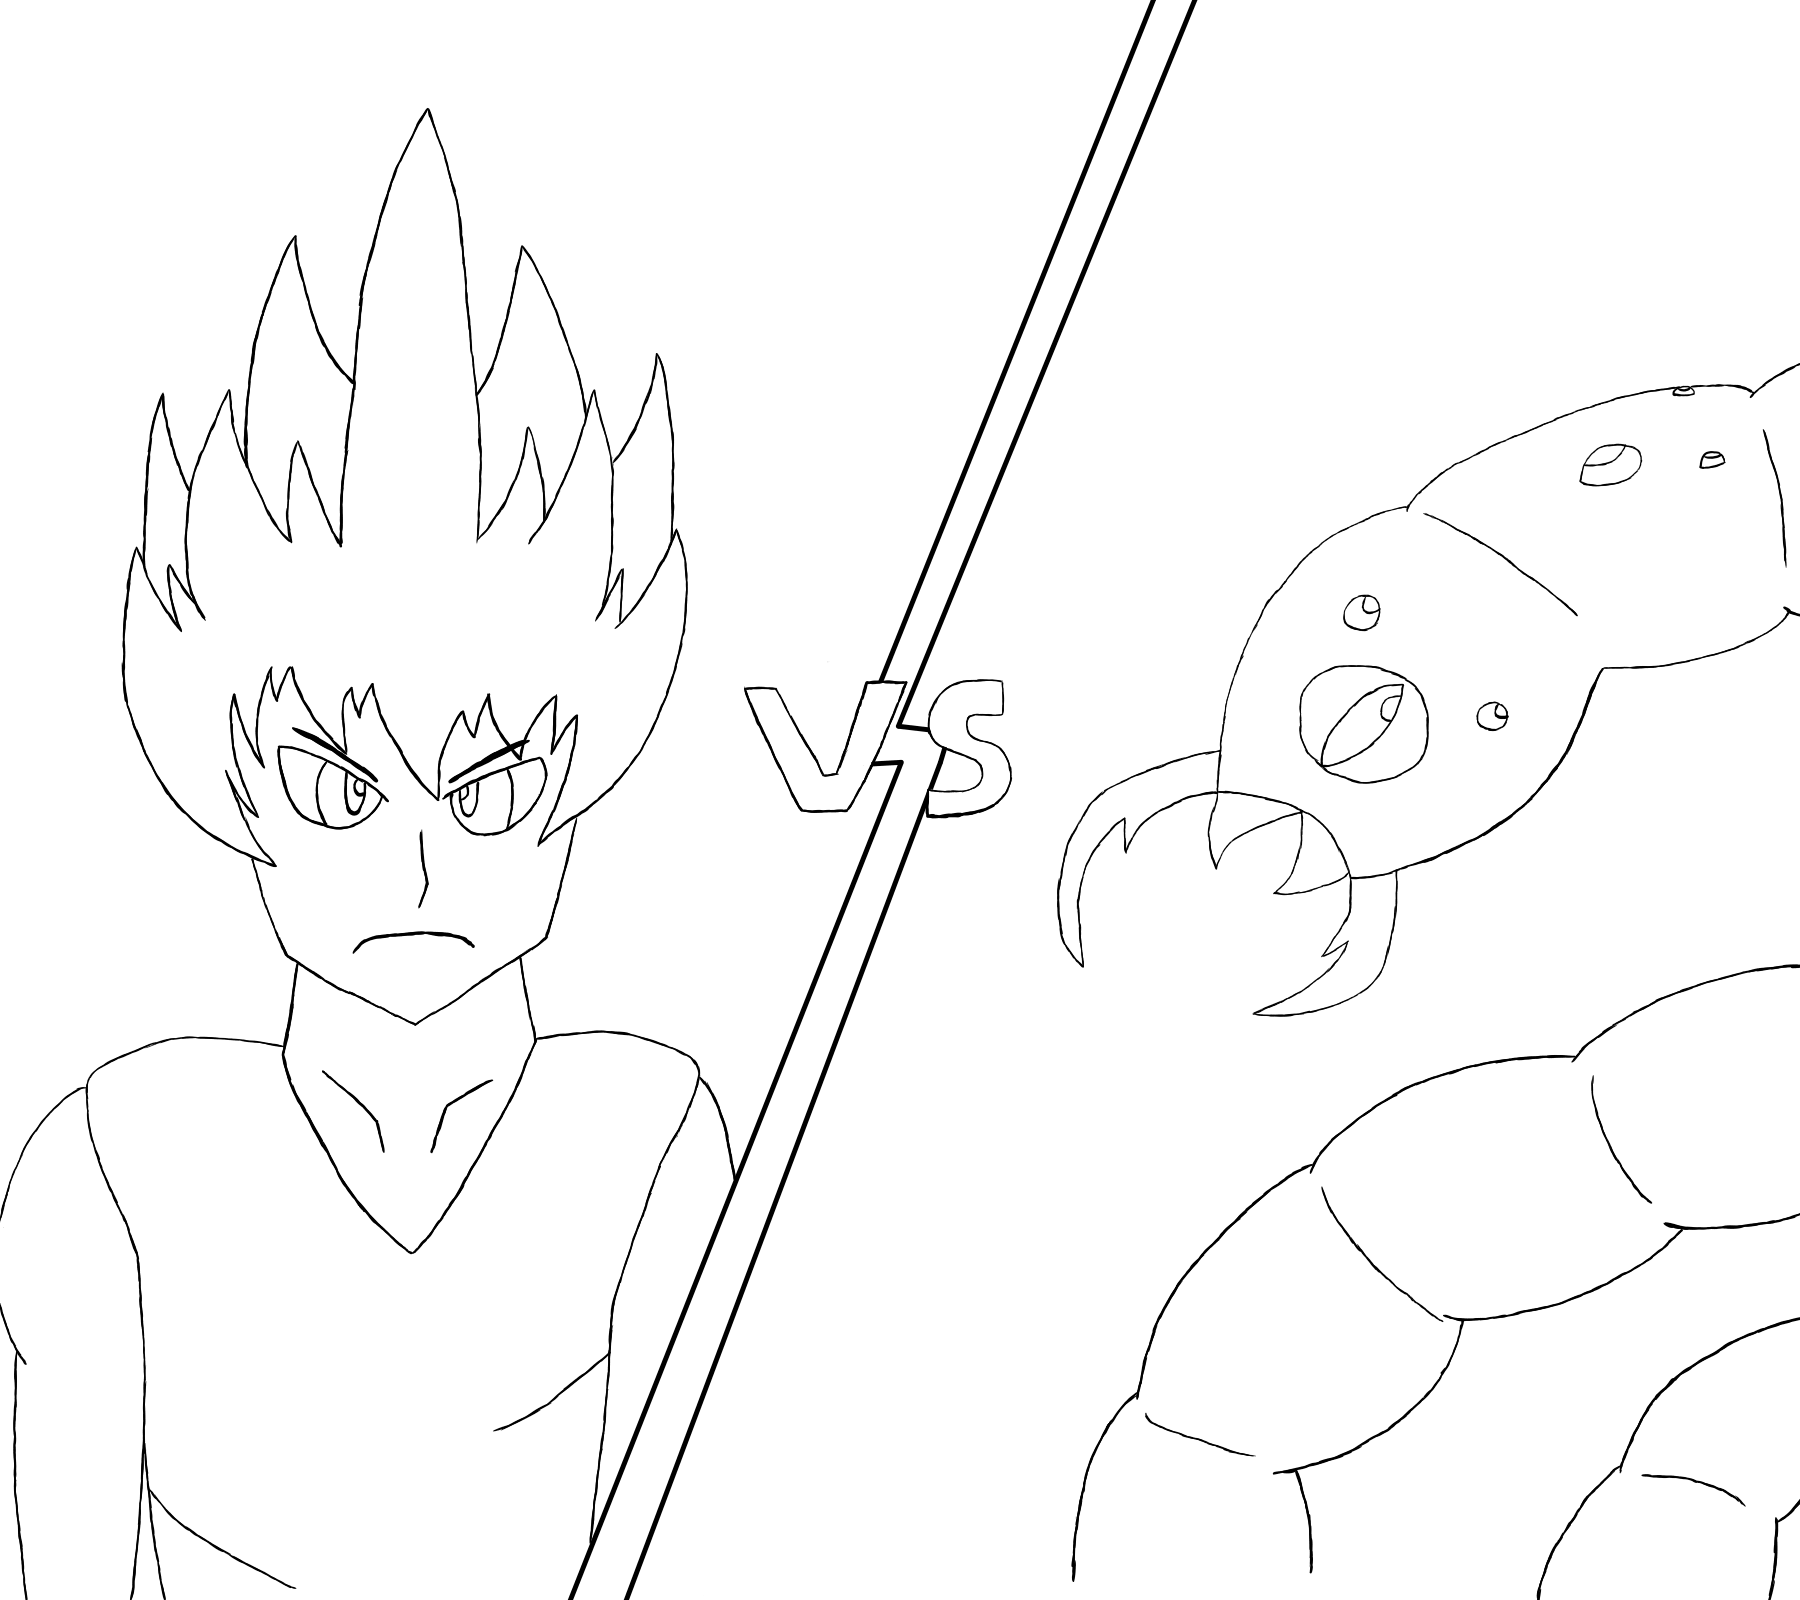 One Life Man VS Eater of Worlds.png